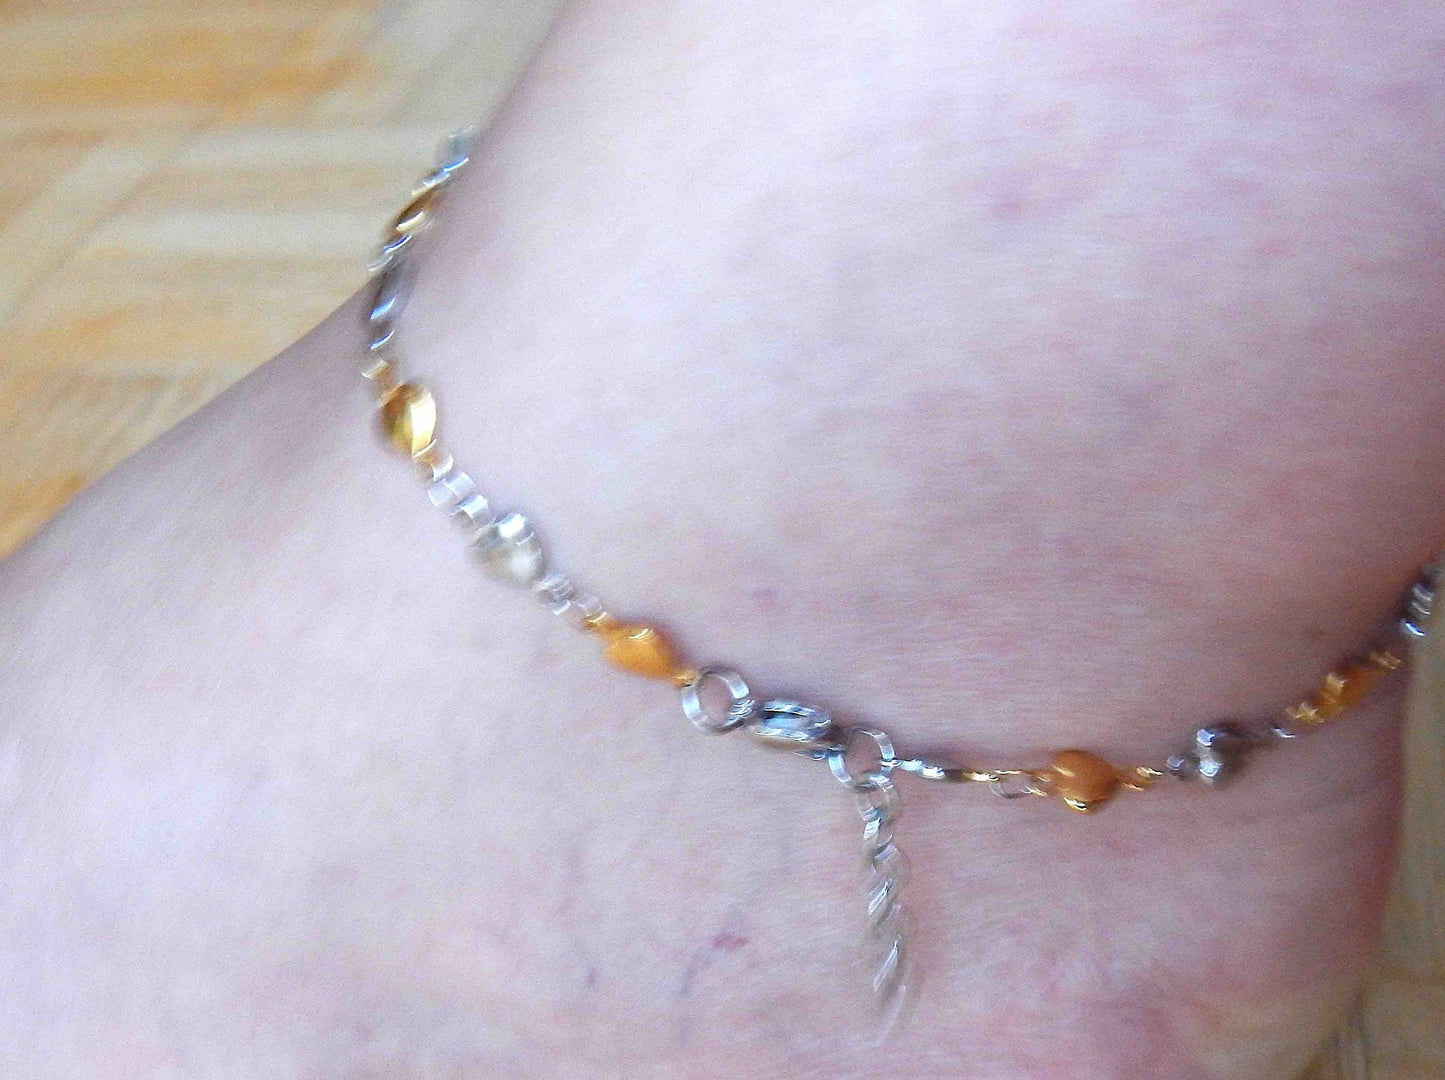 Anklet with alternating tiny silver and gold hearts, all hypoallergenic stainless steel